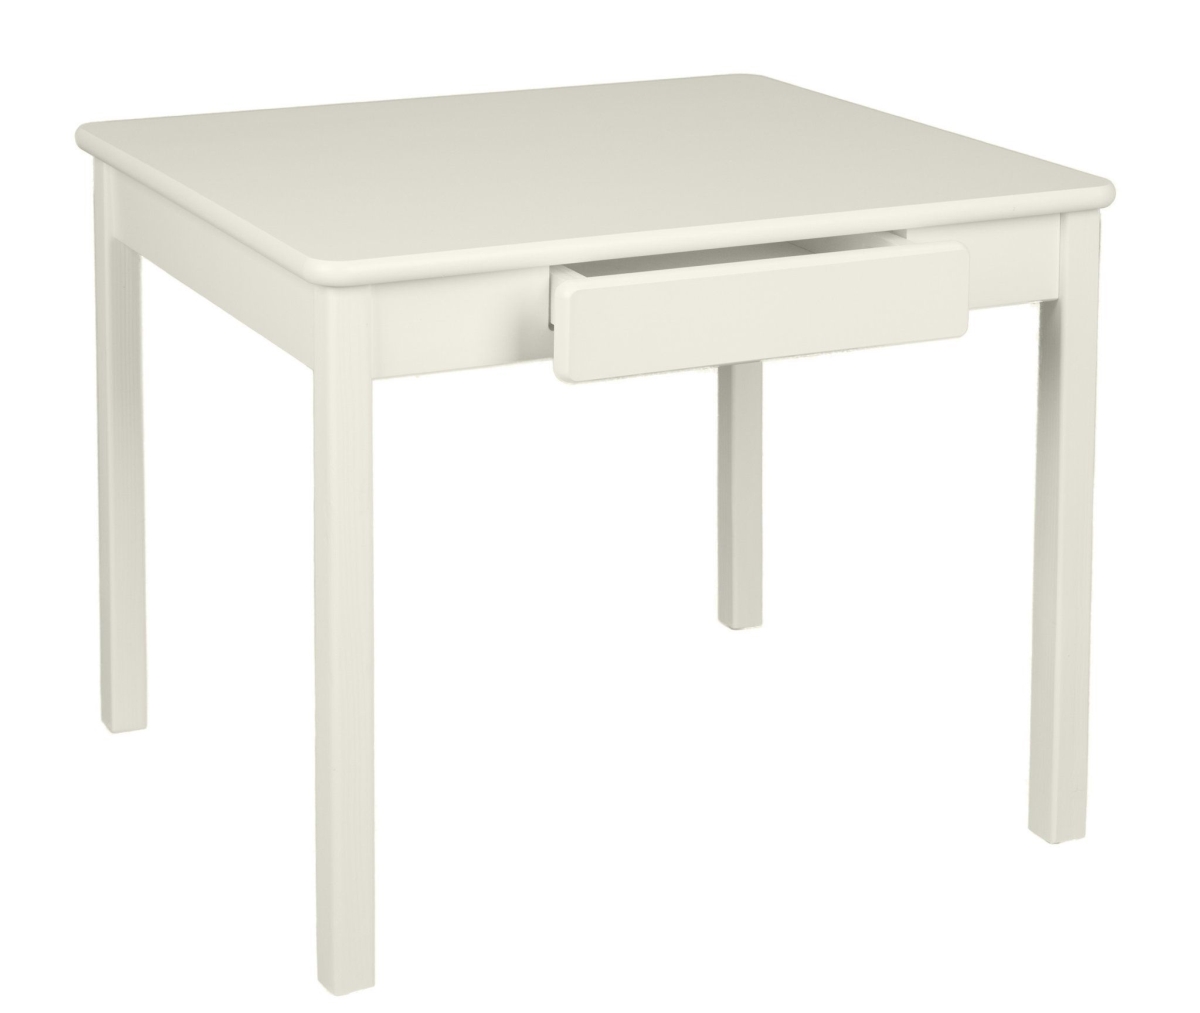 044gry Arts & Crafts Table, Gray - Small - 28 X 24 X 23 In.